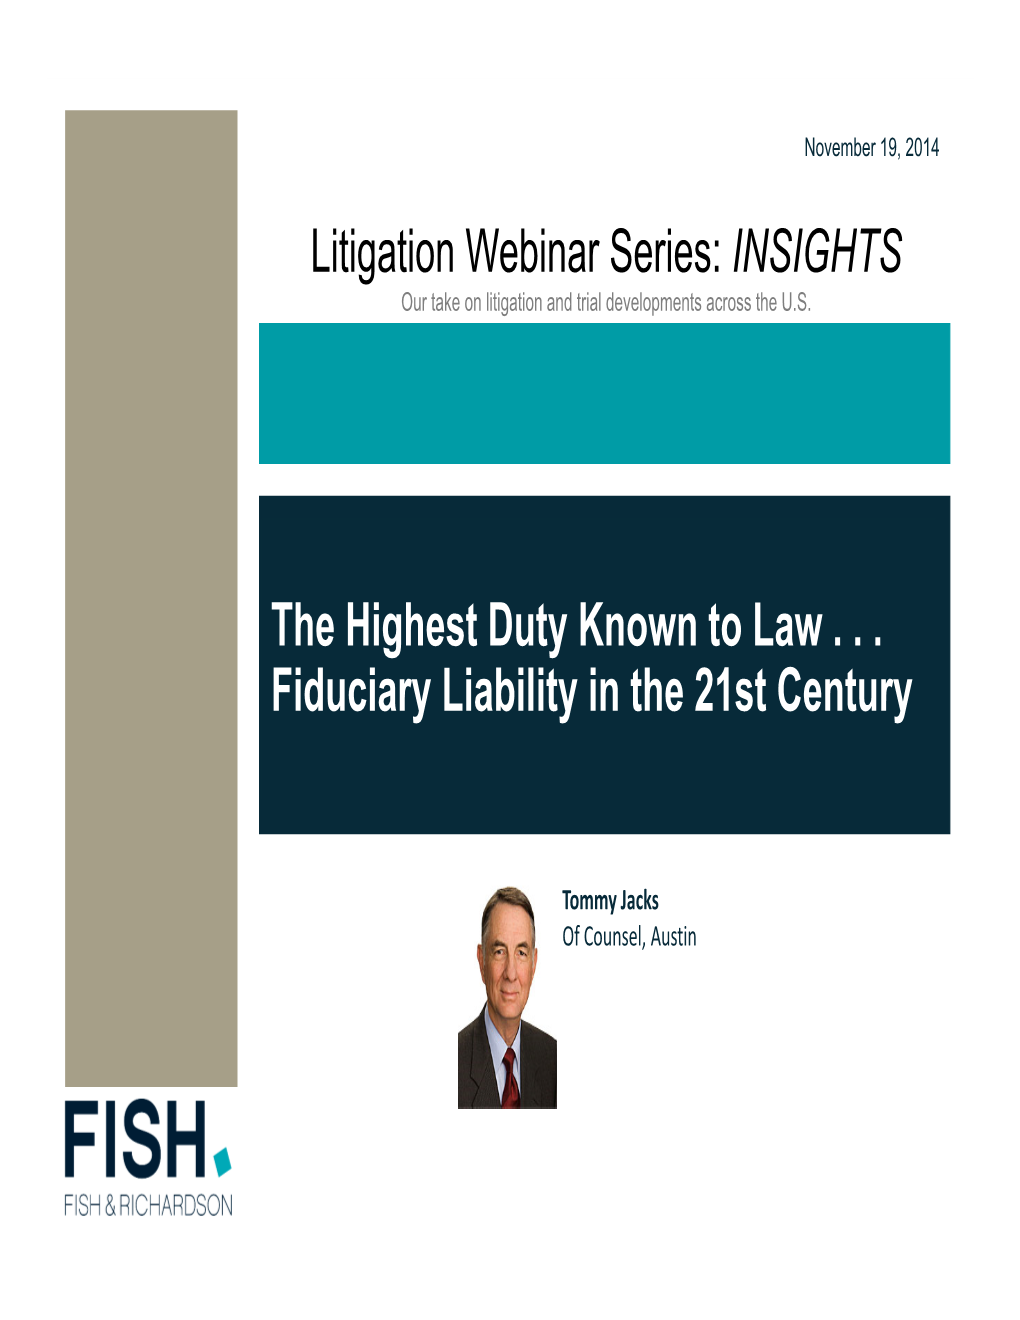 The Highest Duty Known to Law . . . Fiduciary Liability in the 21St Century